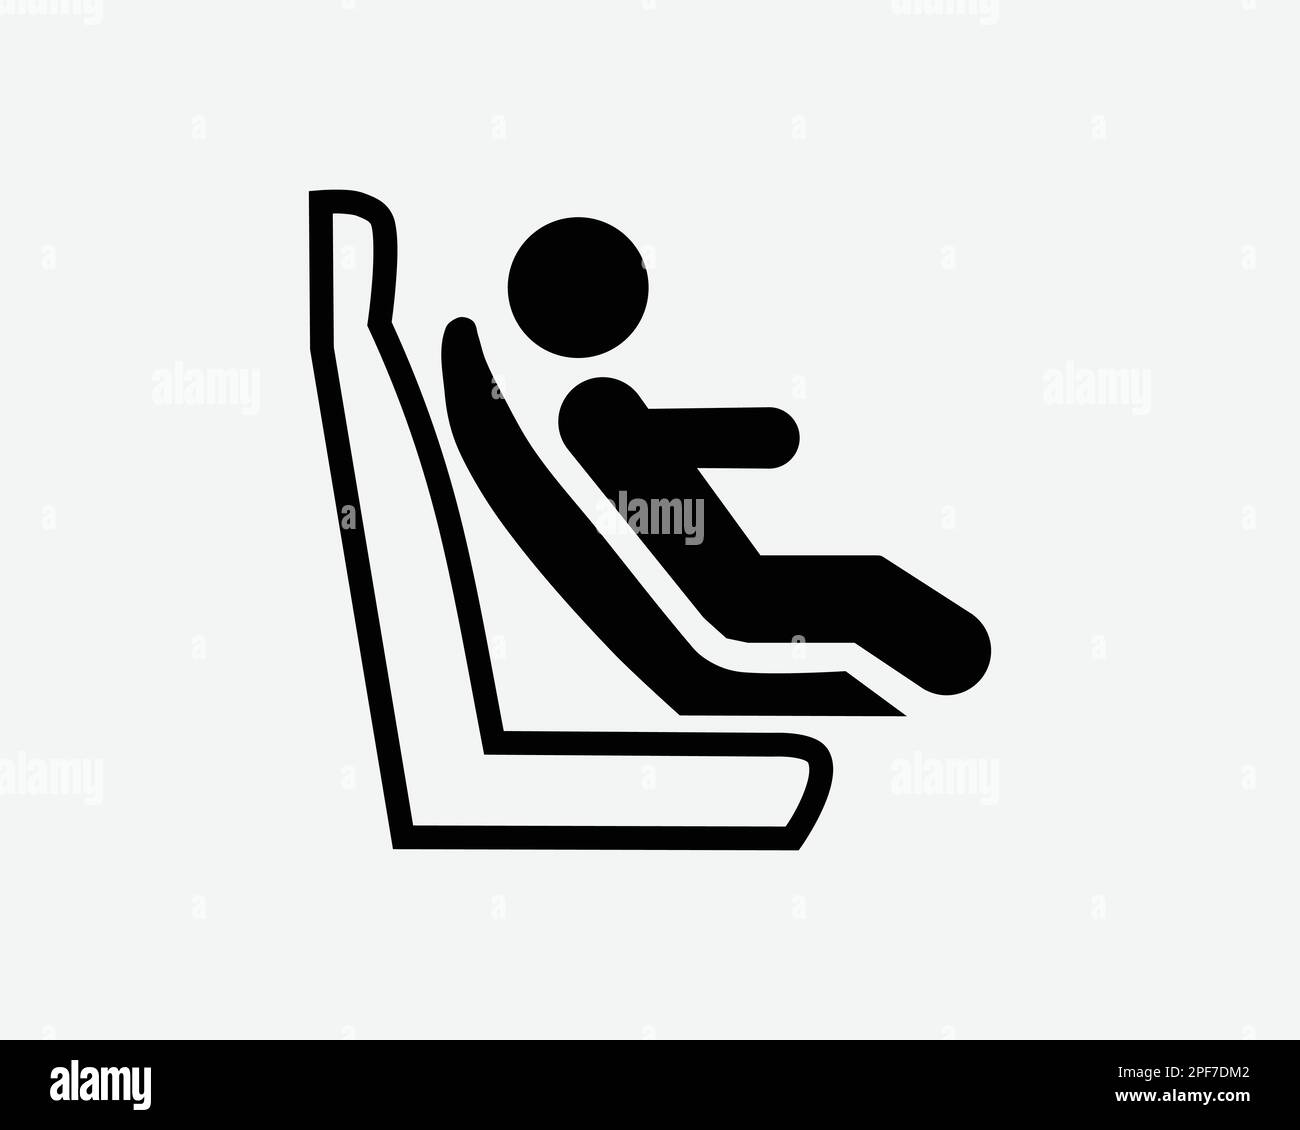 Forward Facing Child Seat Children Car Vehicle Safety Black White Silhouette Sign Symbol Icon Vector Graphic Clipart Illustration Artwork Pictogram Stock Vector